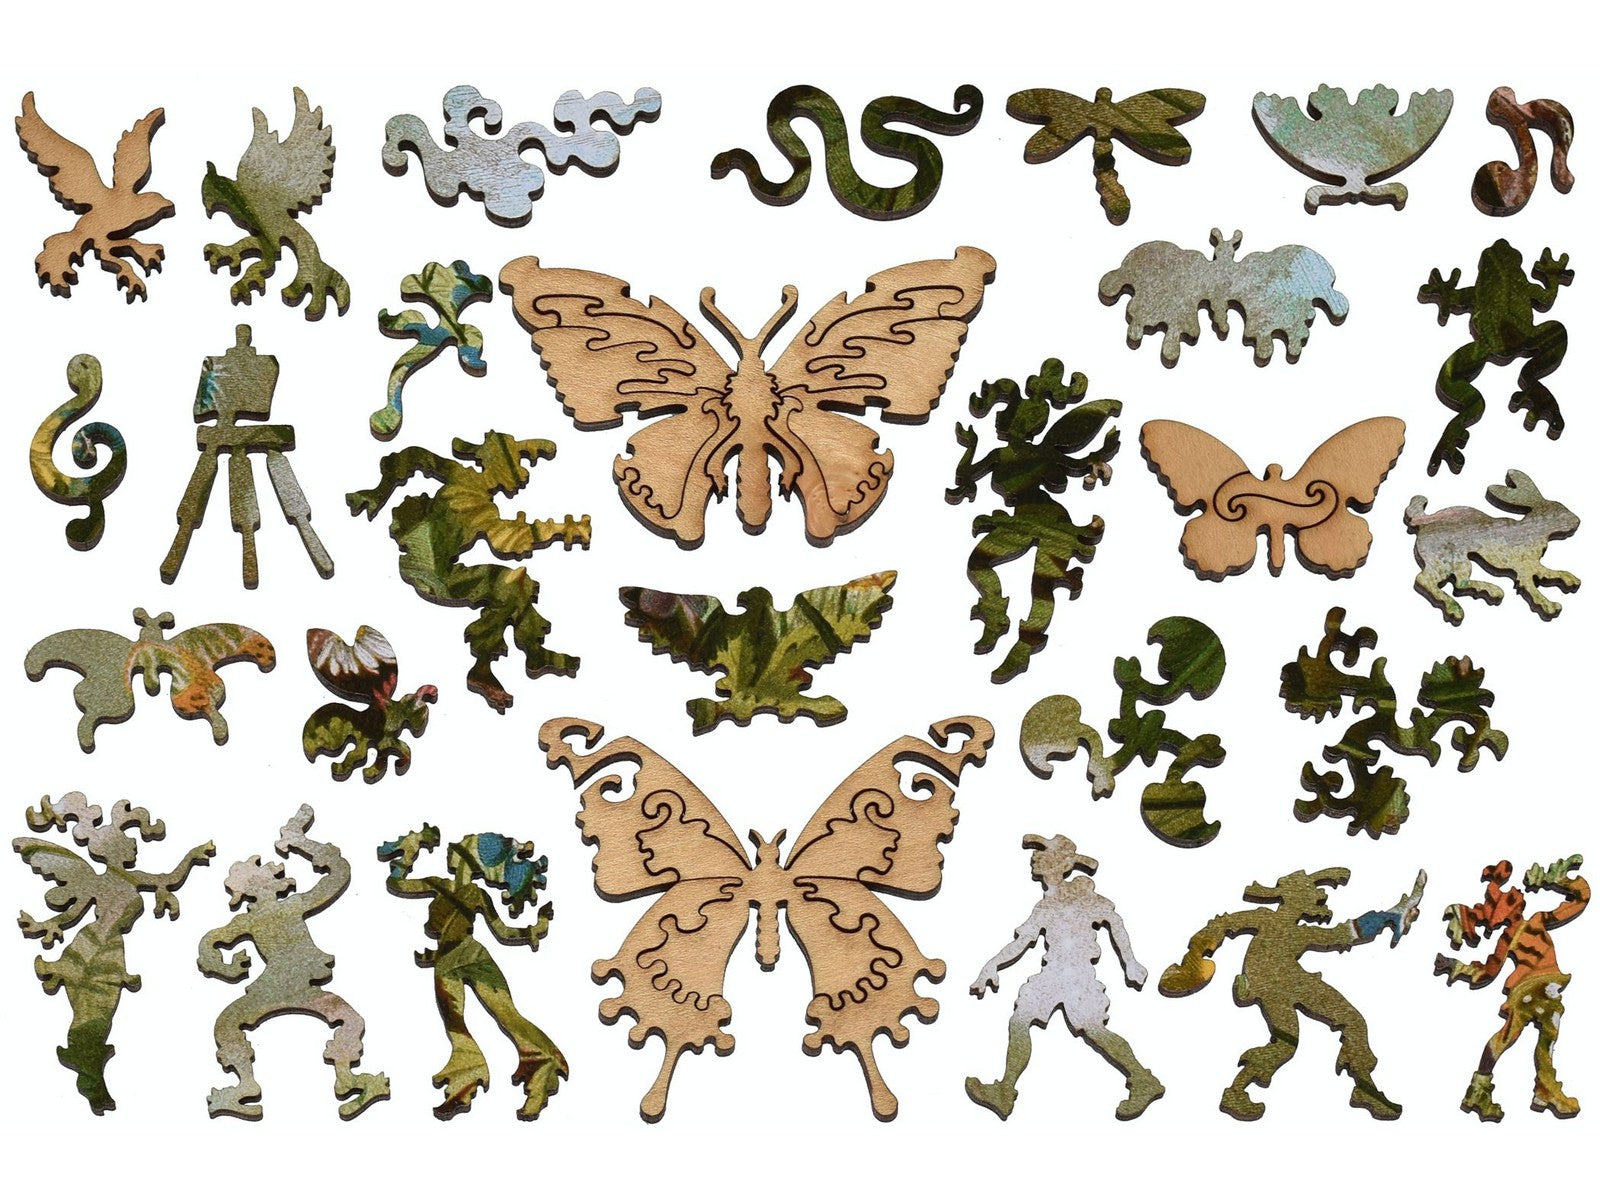 The whimsies that can be found in the puzzle, German Butterflies.